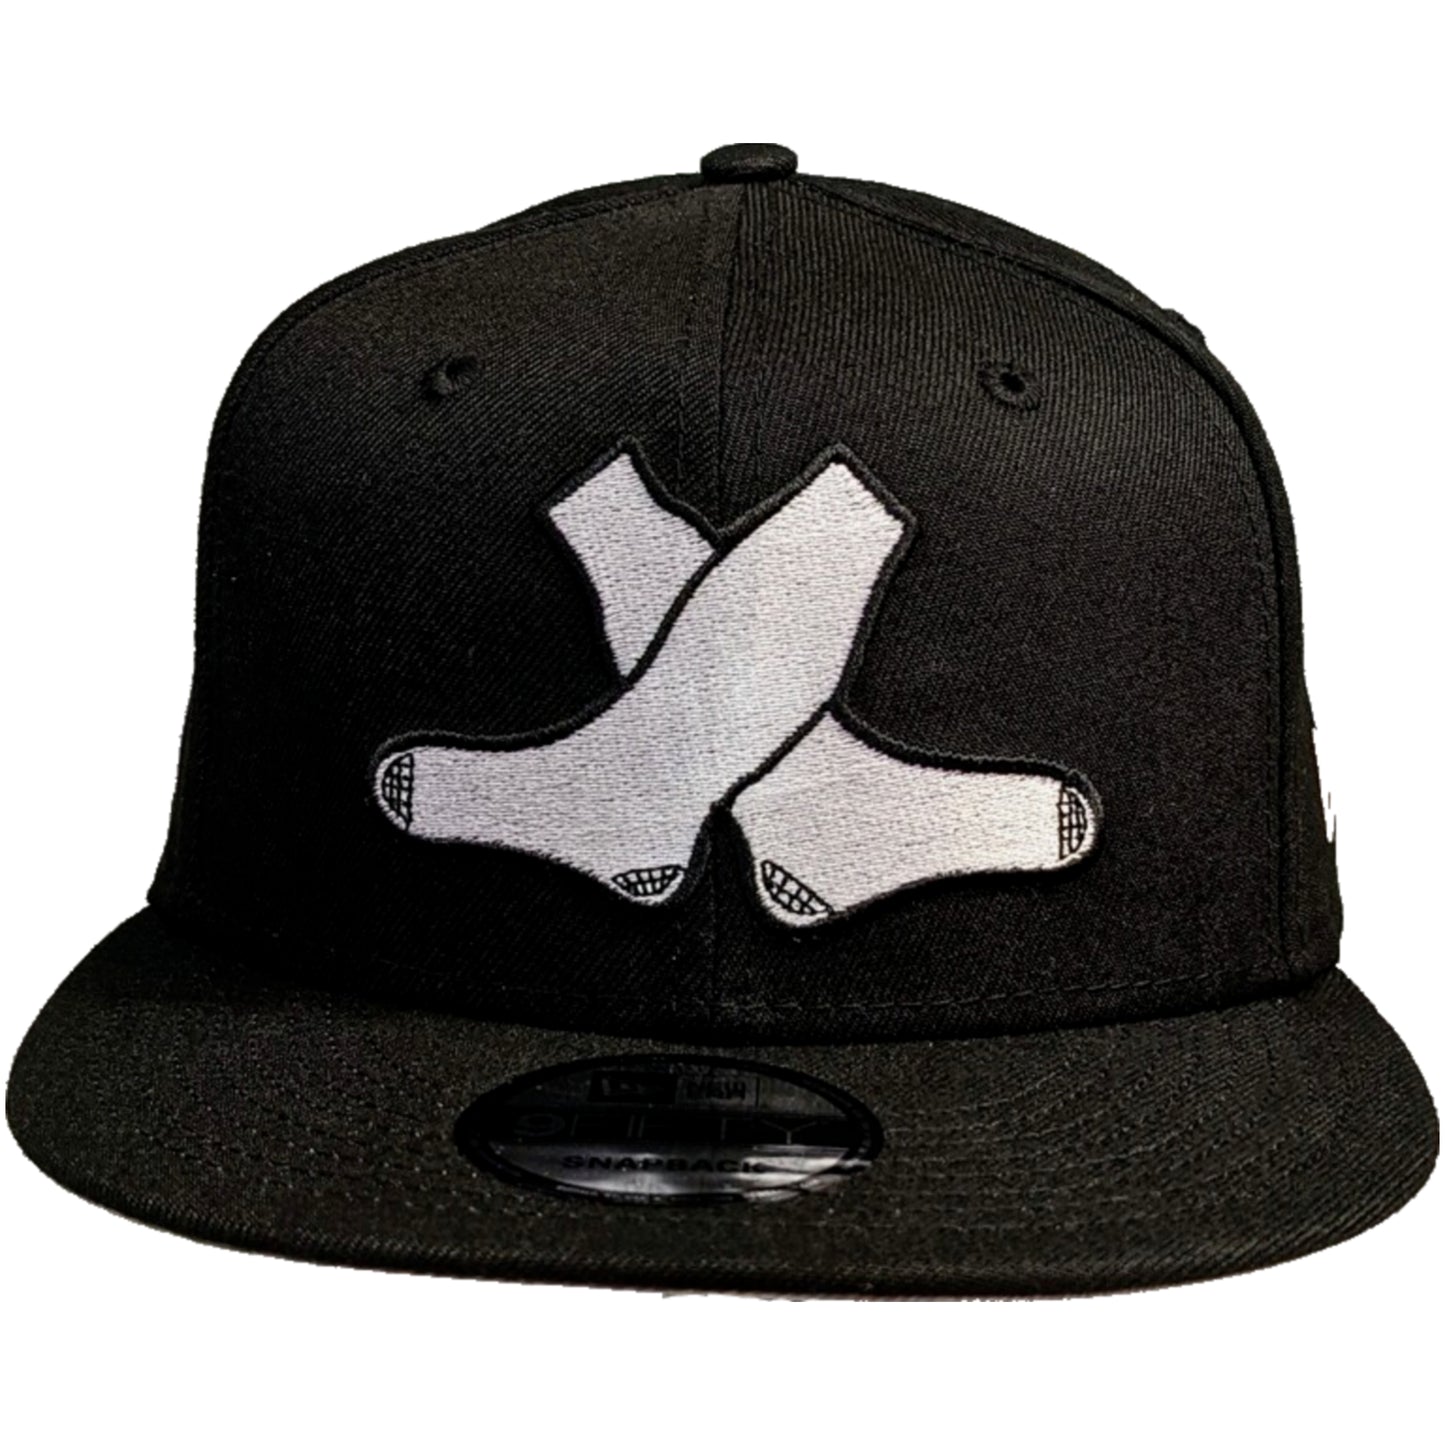 Mens Chicago White Sox New Era Black Cooperstown Collection 1920 Cross Socks 9FIFTY Side Patch Snapback Hat